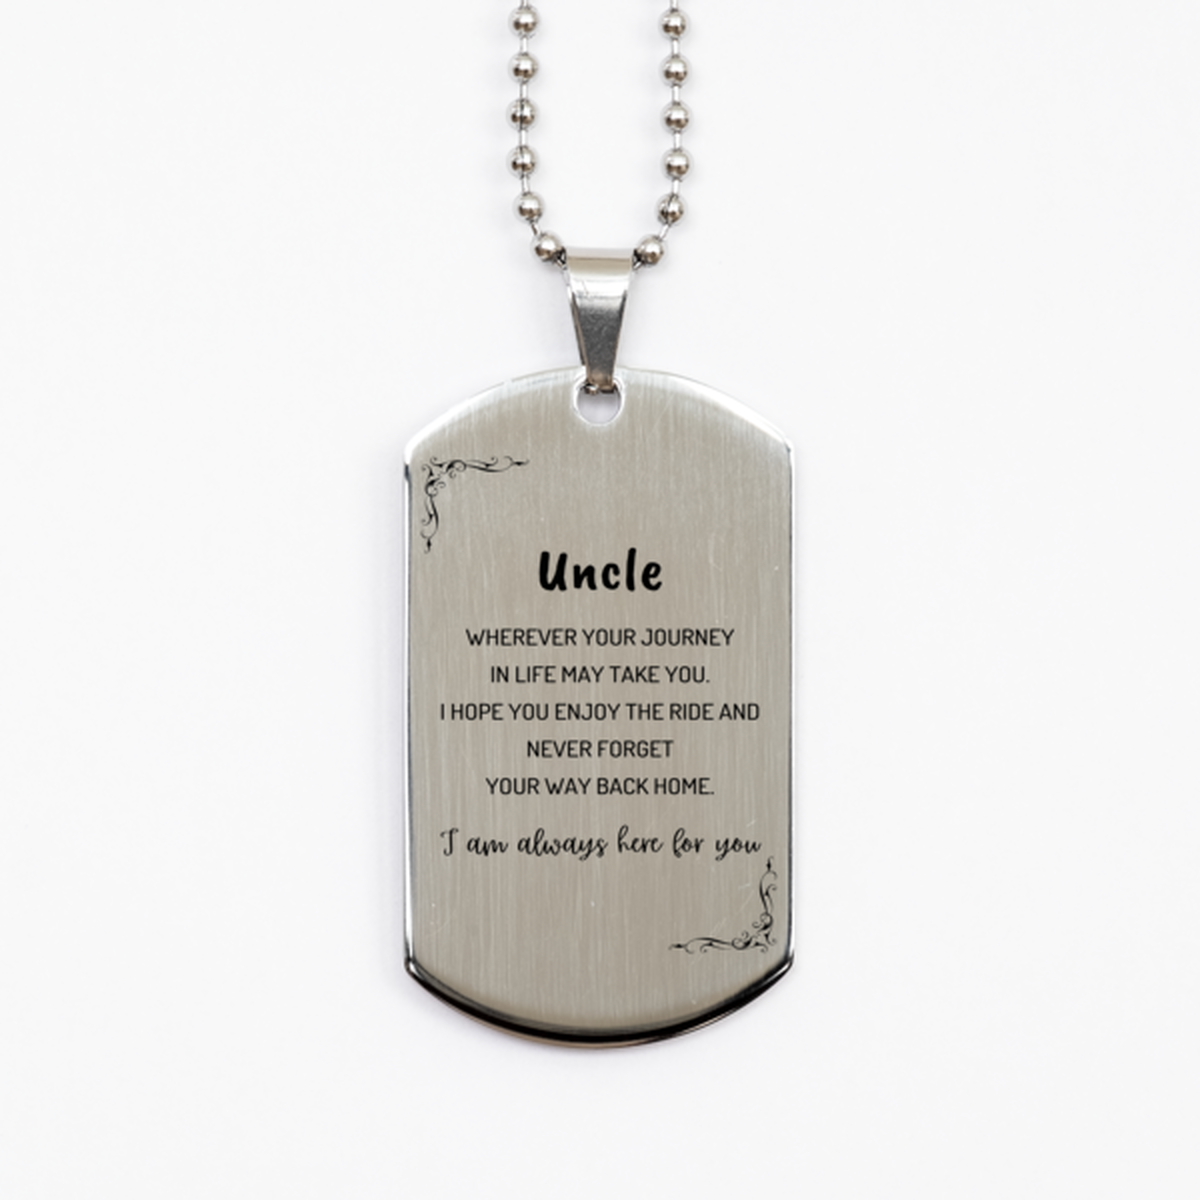 Uncle wherever your journey in life may take you, I am always here for you Uncle Silver Dog Tag, Awesome Christmas Gifts For Uncle, Uncle Birthday Gifts for Men Women Family Loved One